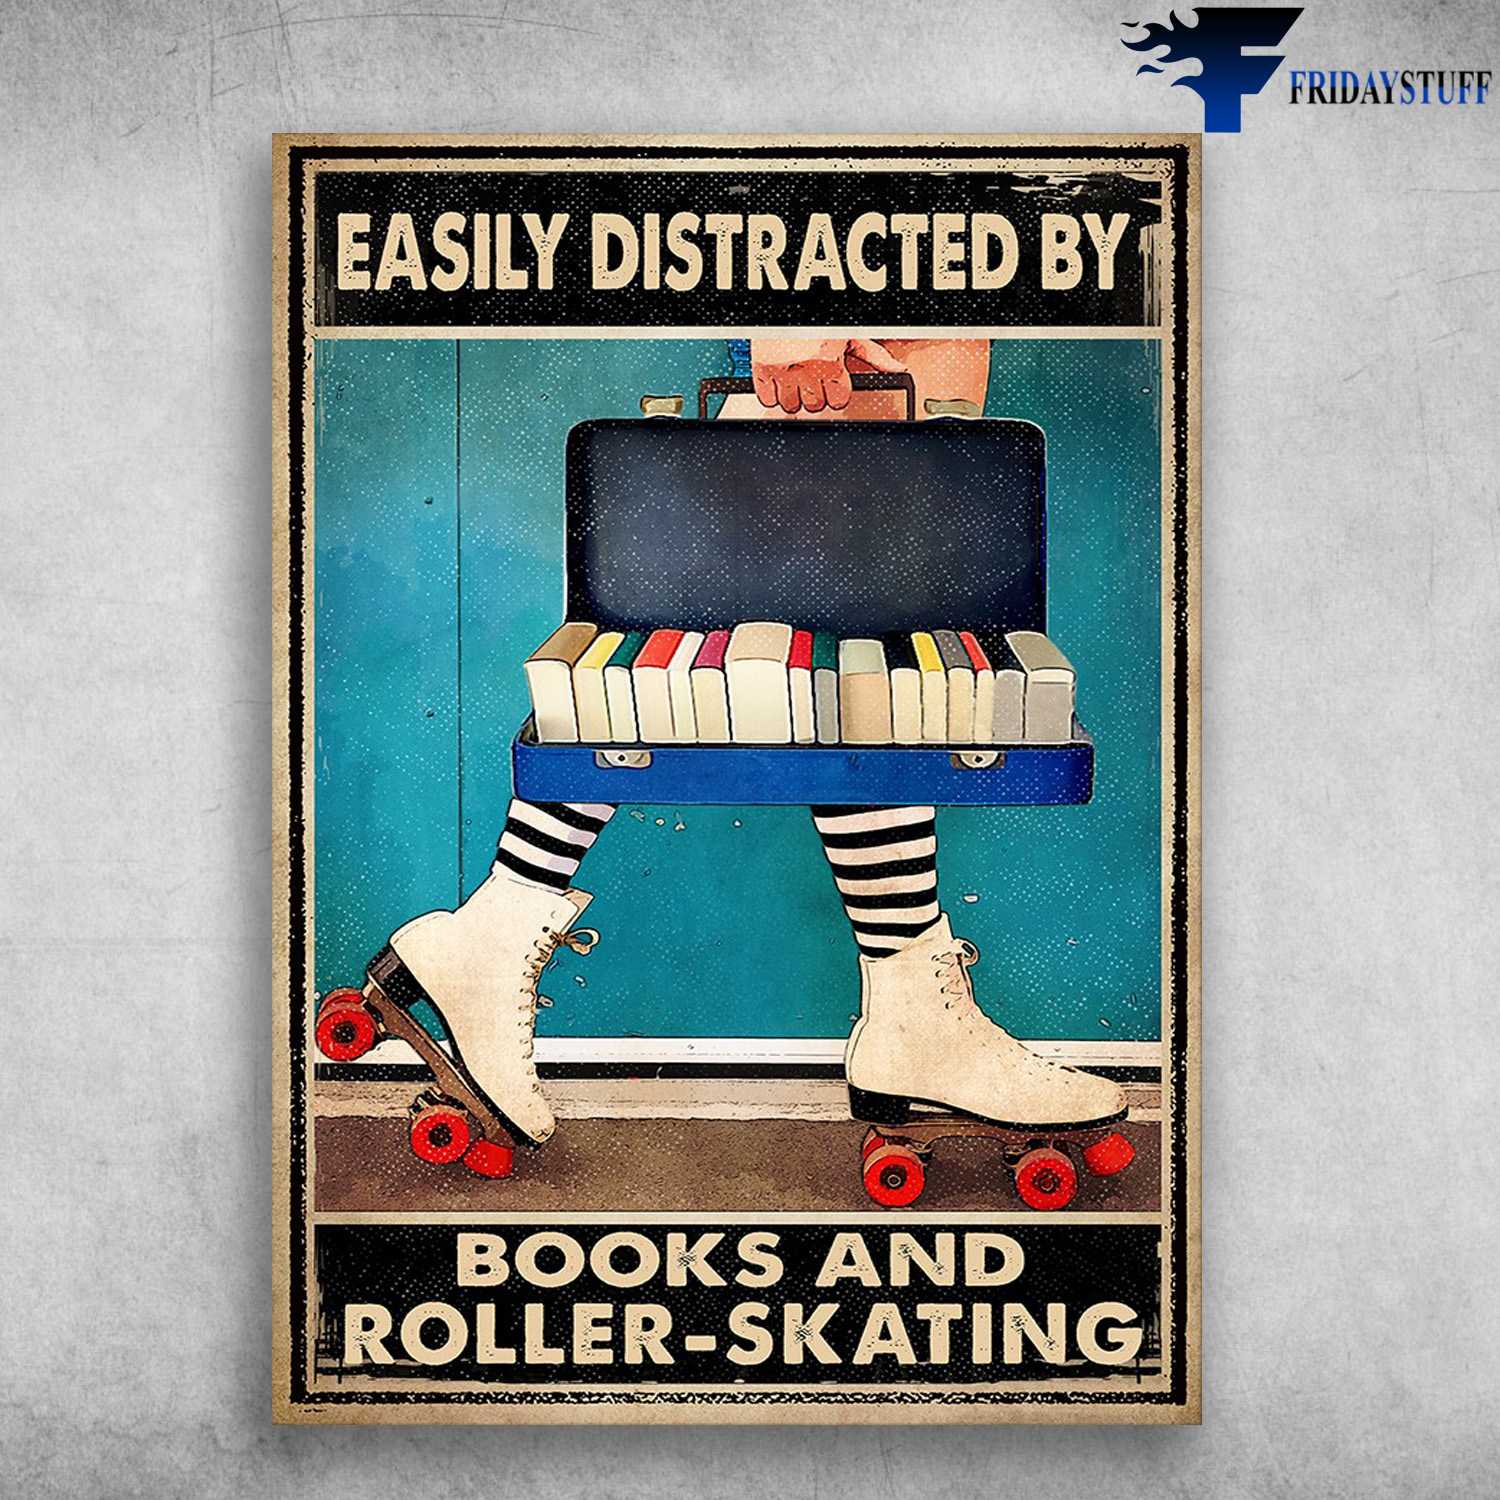 Loller Skating - Easily Distracted By, Books And Roller-Skating